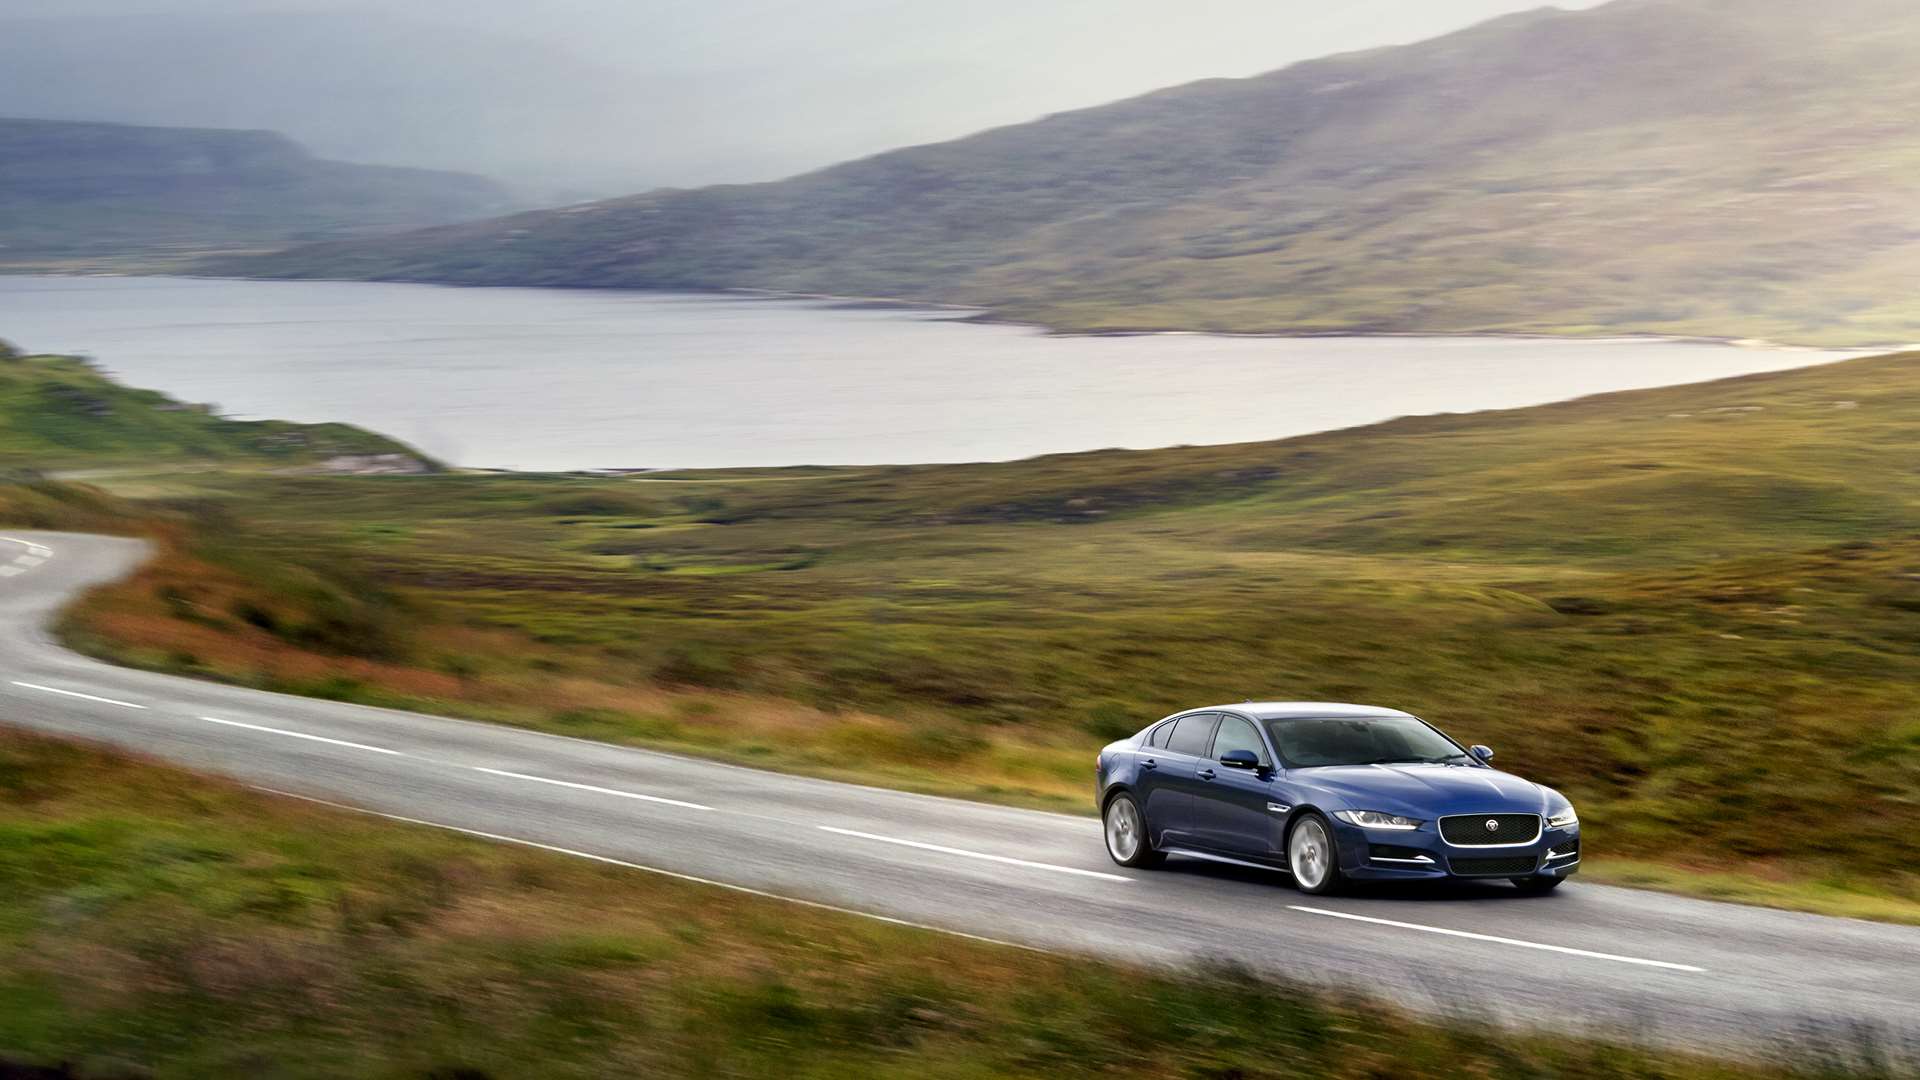 As well as being aesthetically pleasing, the XE delights dynamically, too